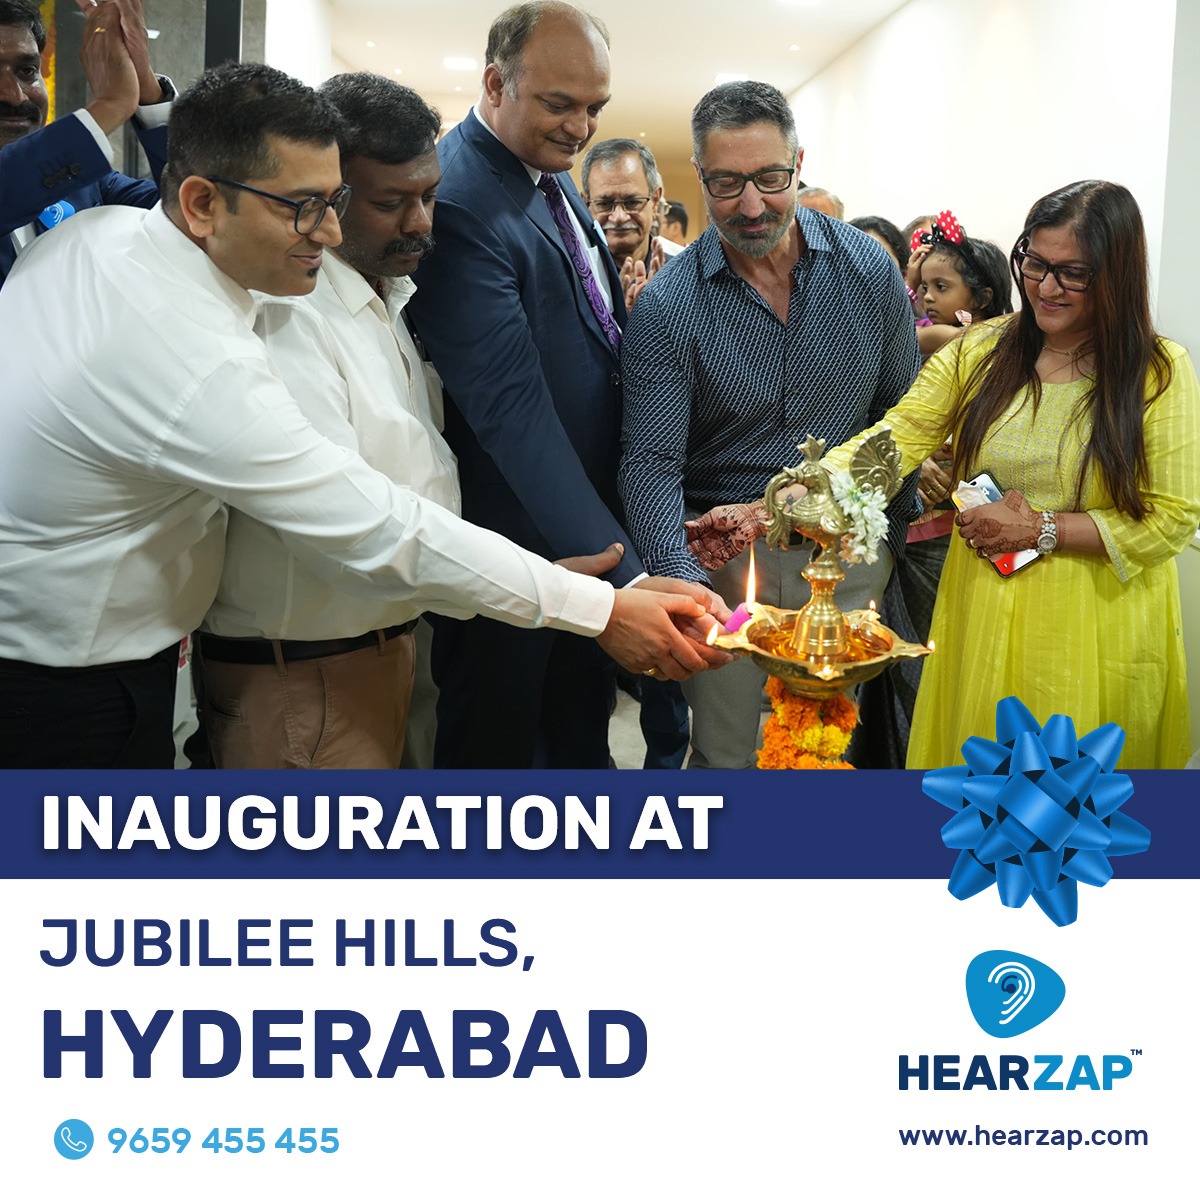 The wait is over! We're thrilled to announce the grand opening of our 100th flagship store & corporate office today at Jubilee Hills Rd. No. 5. Esteemed guests and dignitaries from around the world graced the momentous occasion. #hearzap #betterhearing #flagshipstore